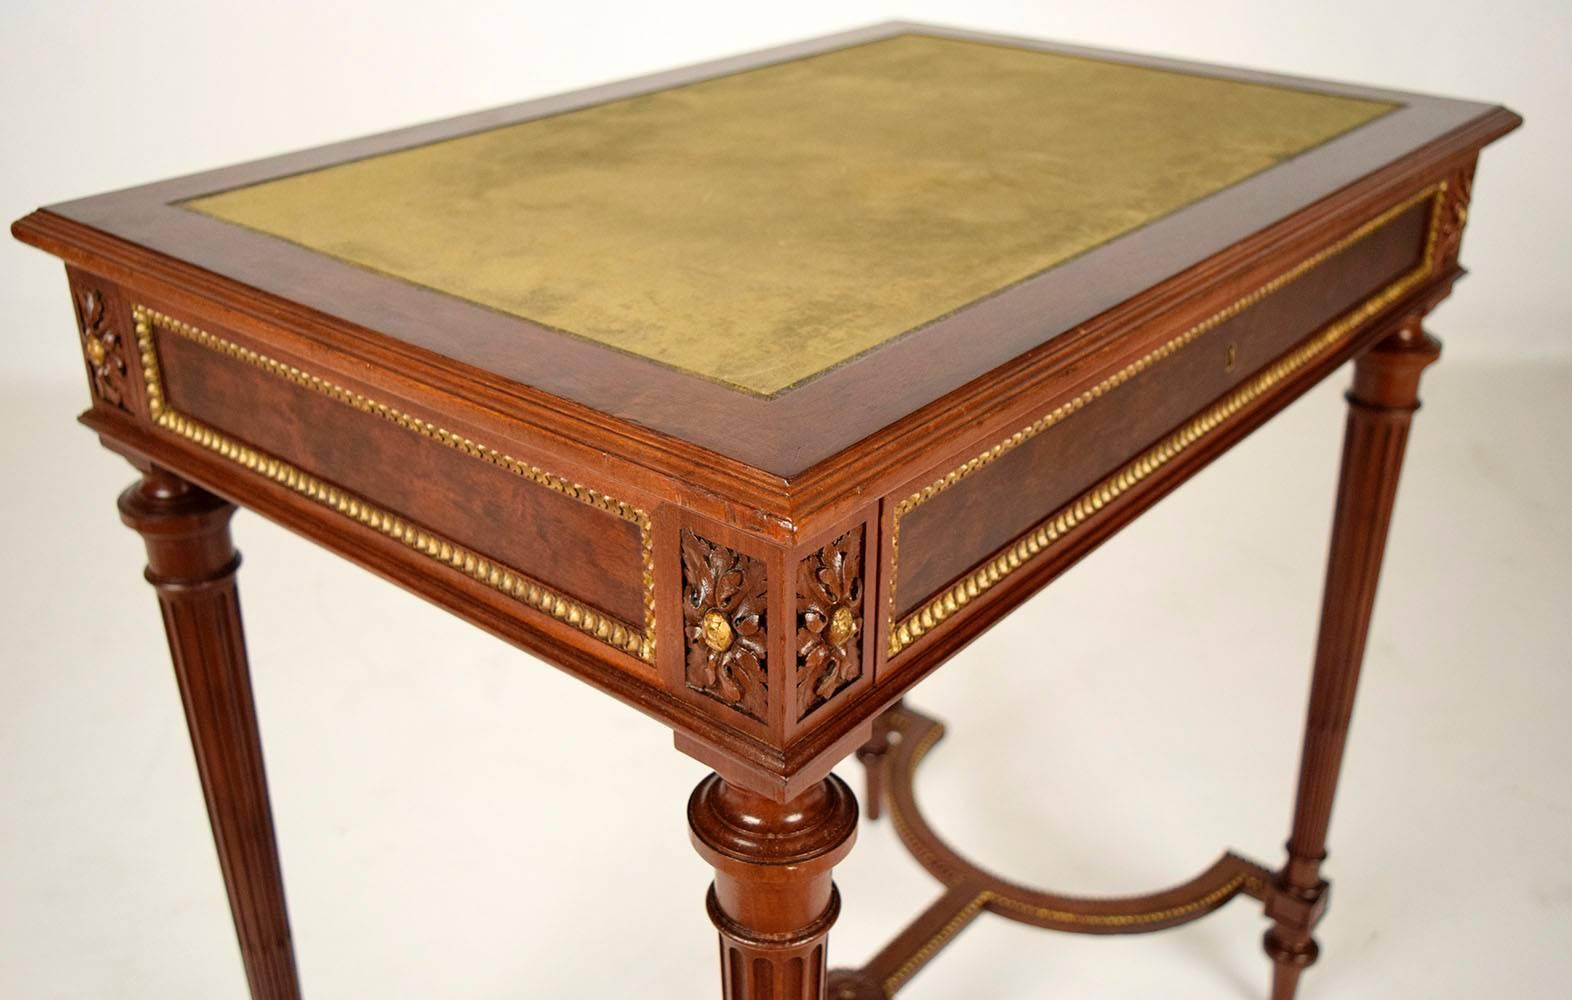 This stunning 19th century Paul Sormani writing desk is made from mahogany wood in its original mahogany stain color finish. The desk top features the original embossed leather writing area in a lovely shade of green. Around the edges of the desk